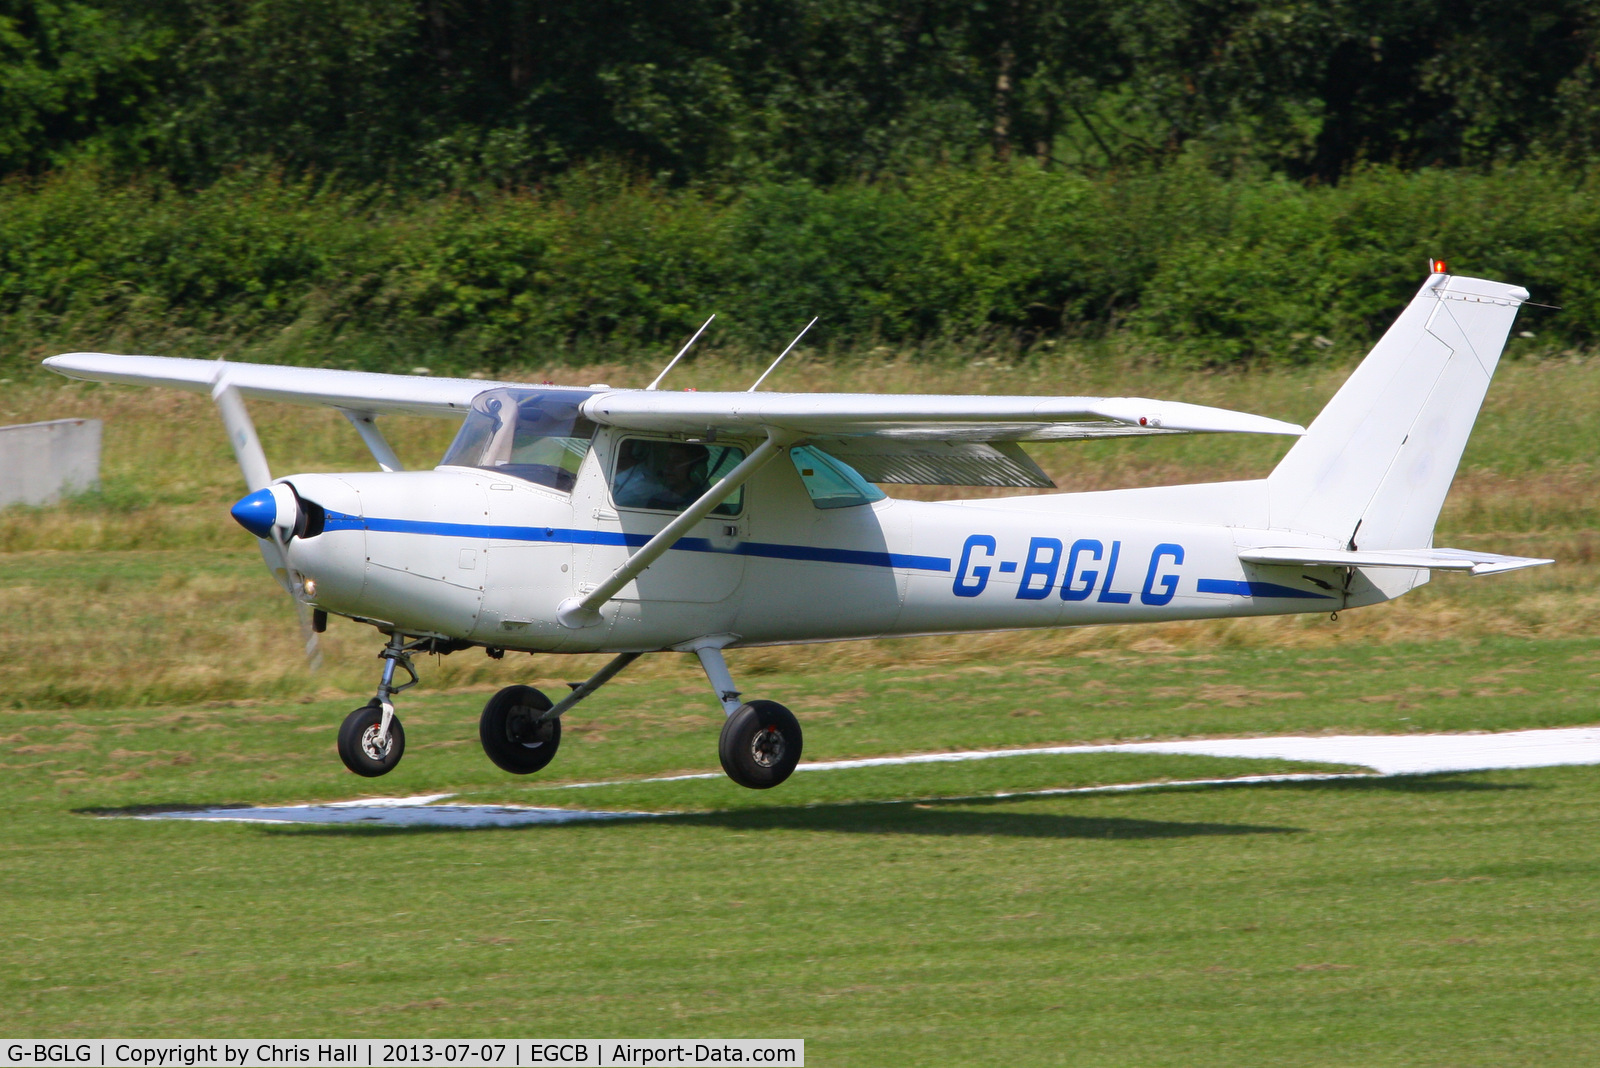 G-BGLG, 1978 Cessna 152 C/N 152-82092, at the Barton open day and fly in